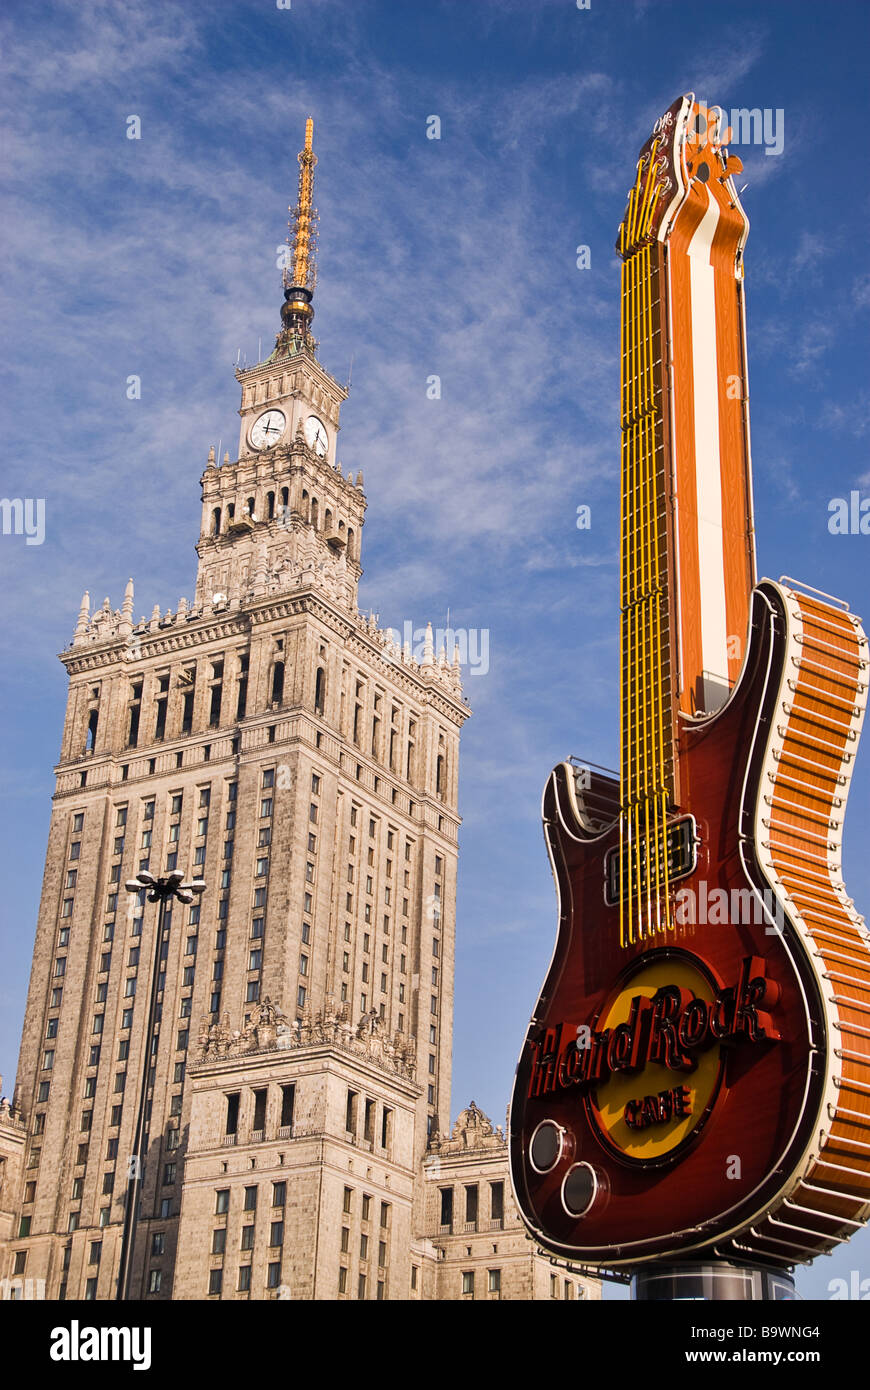 Streets of Warsaw with the communist Palac Kultury i Nauki building and the Hard Rock Cafe sign, Poland, Europe. Stock Photo